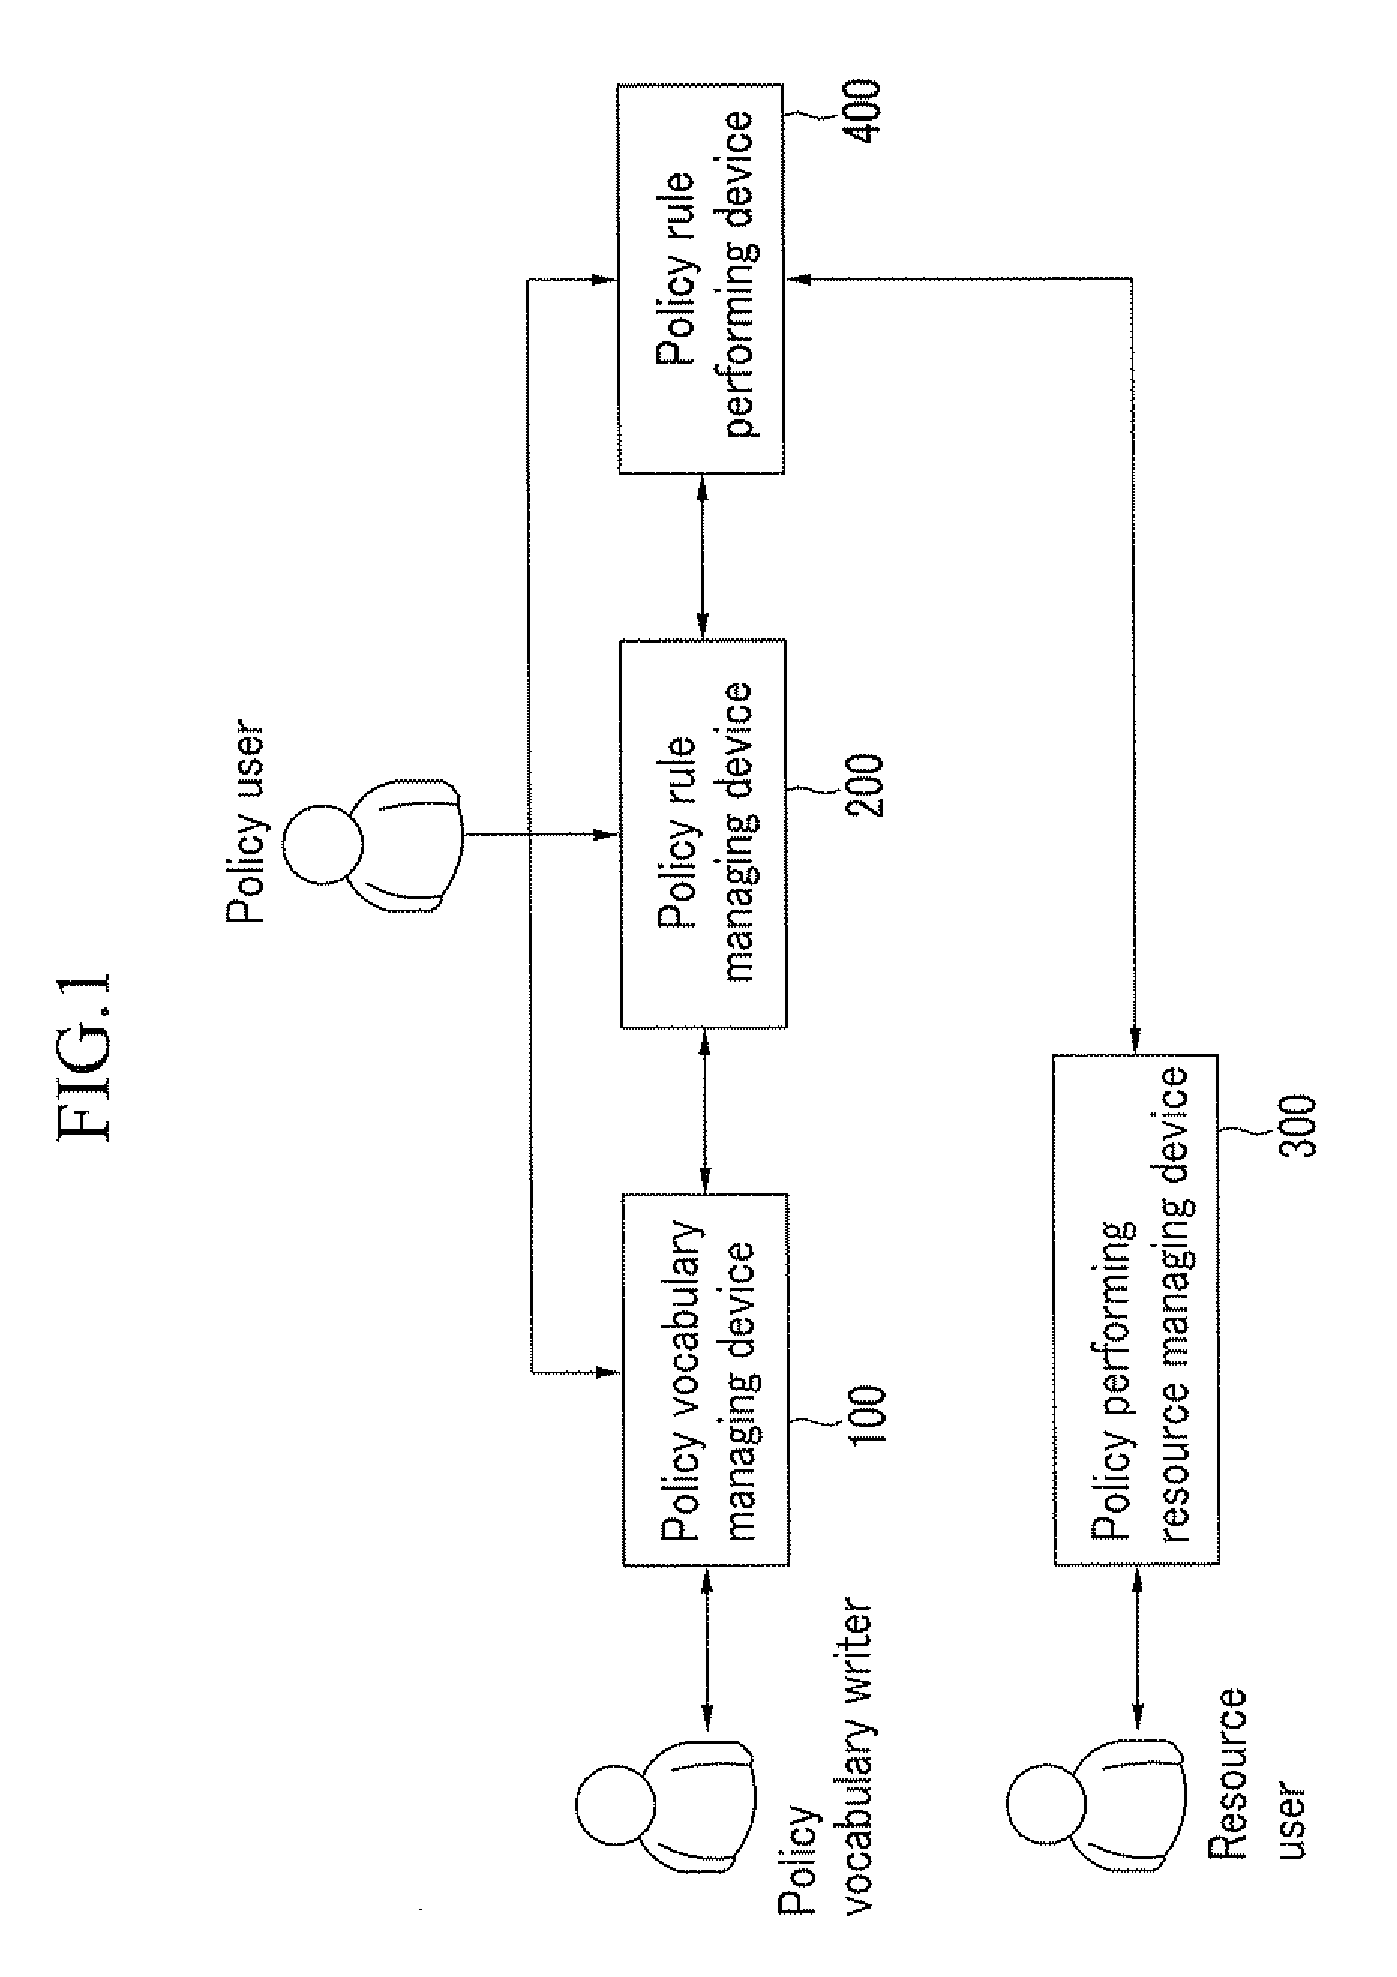 System and method for providing policy based radio frequency identification service